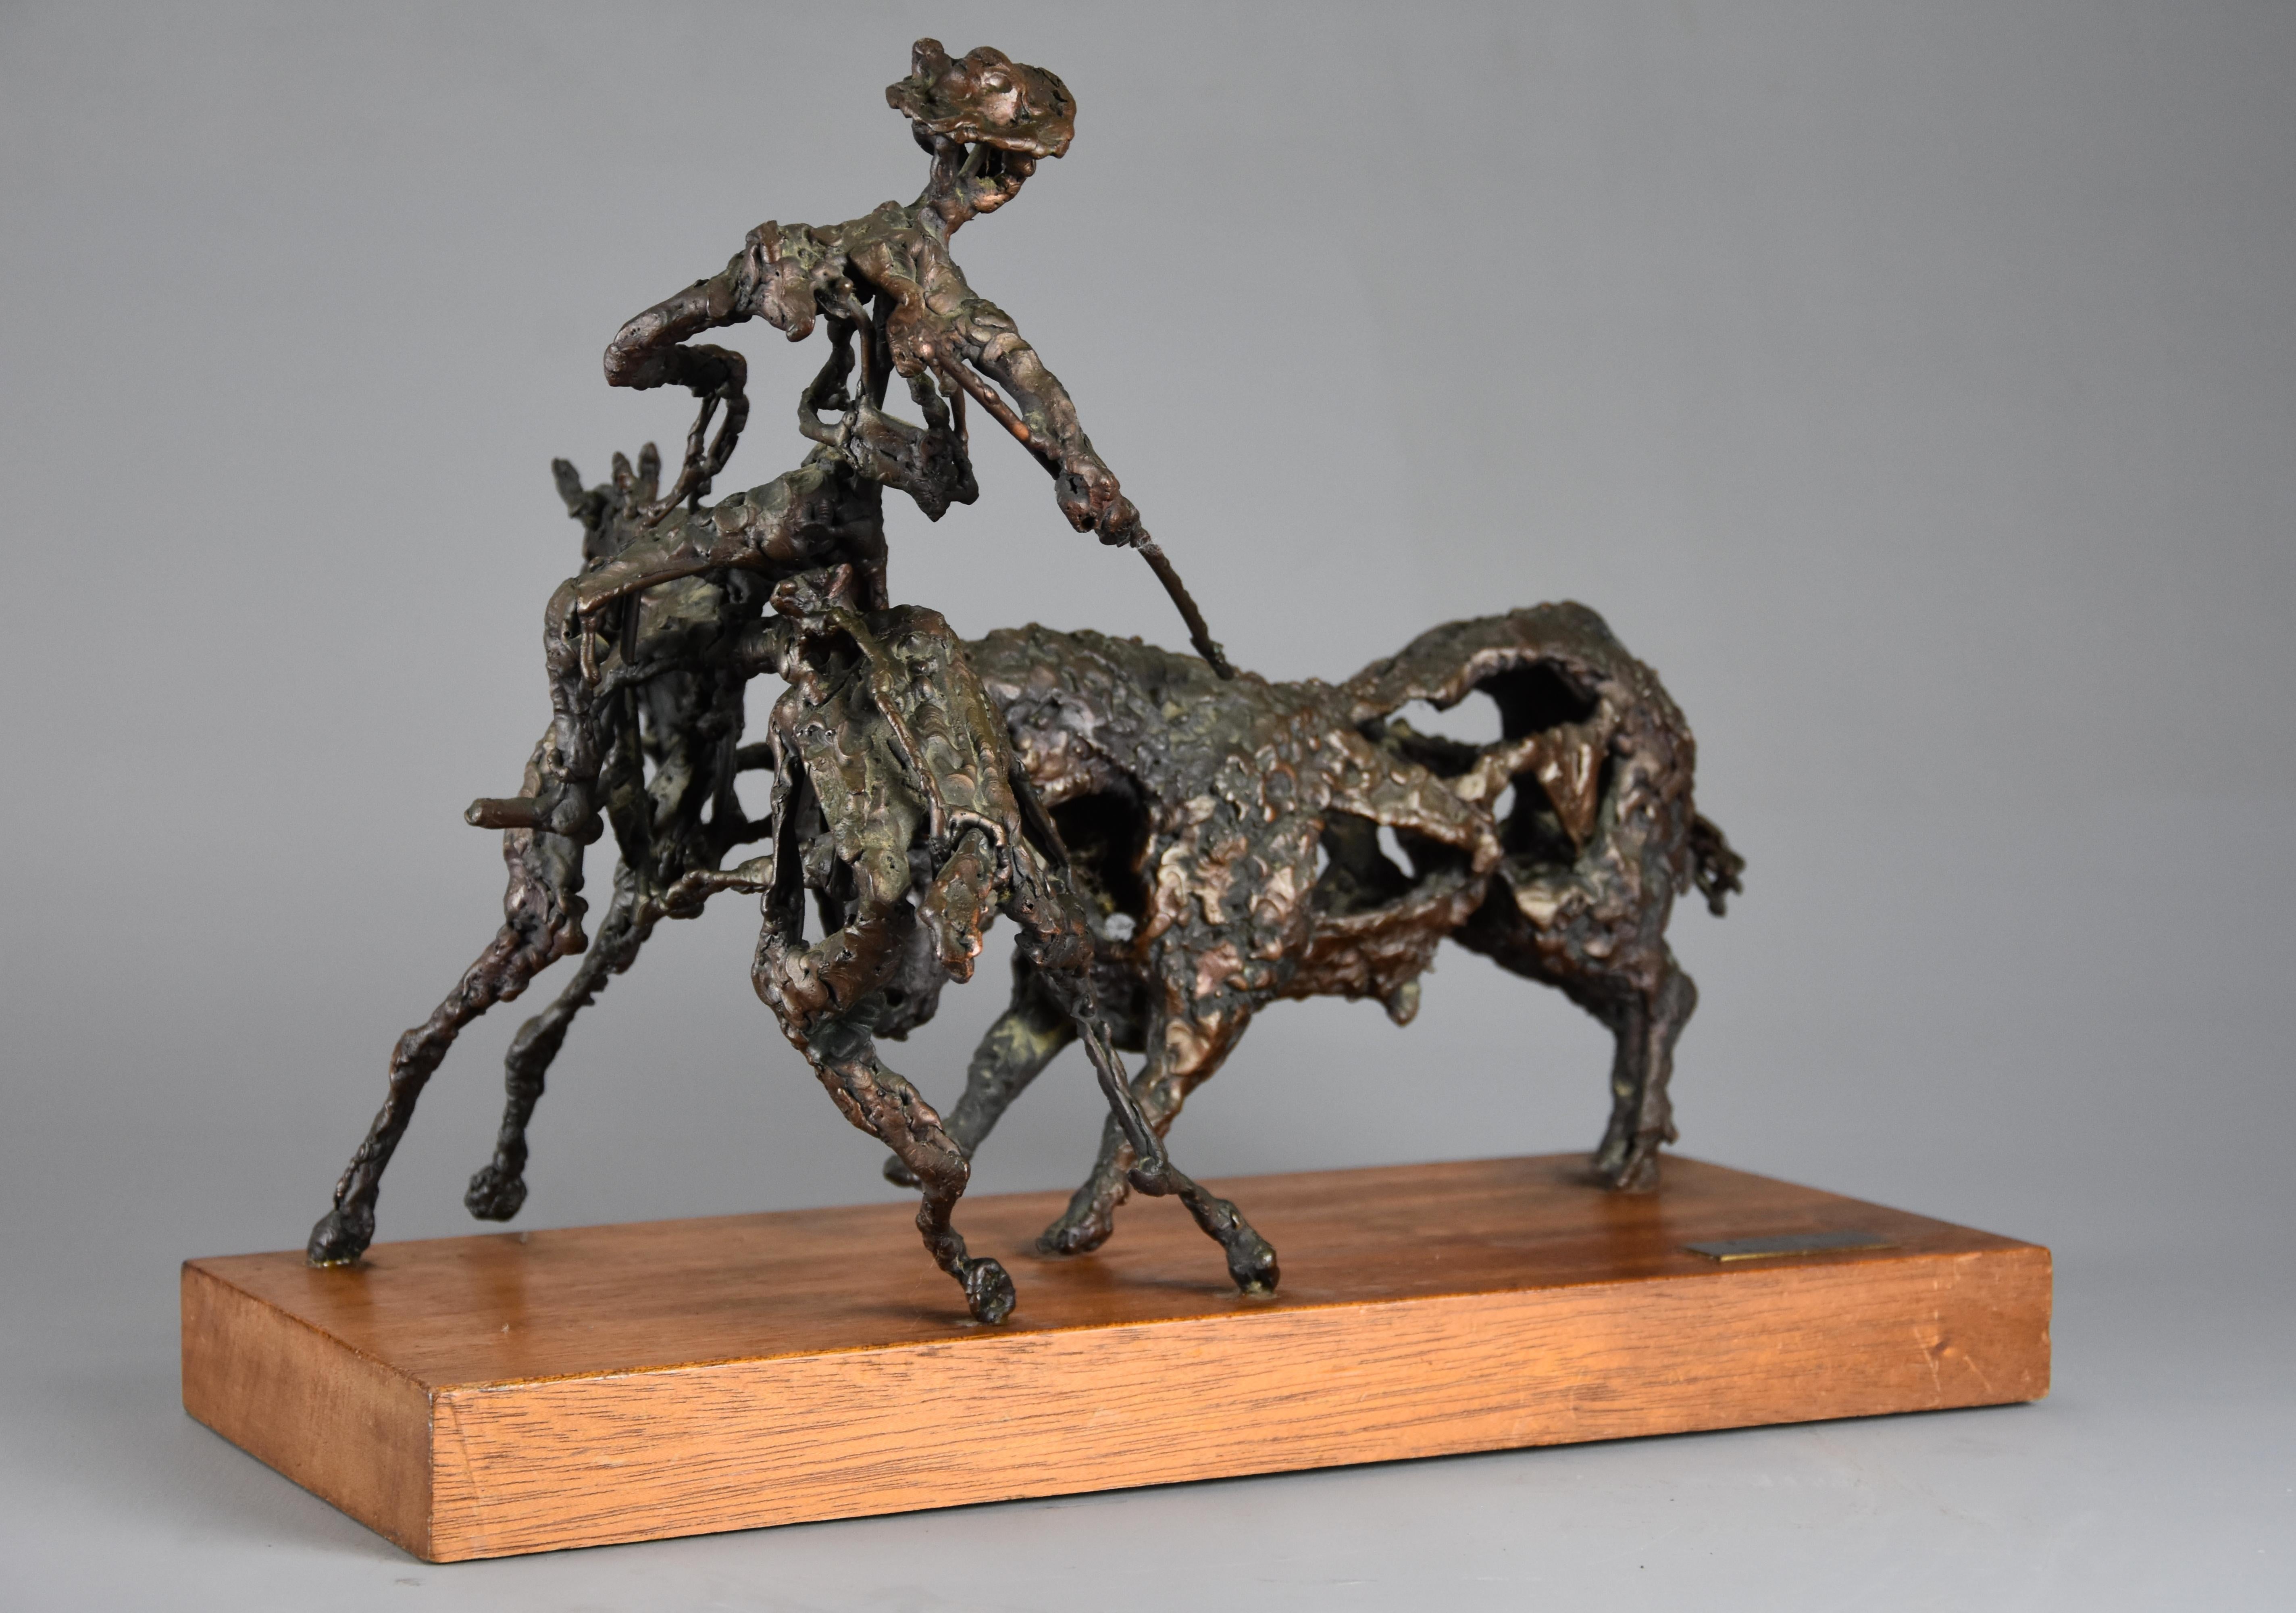 A bronze sculpture 'The Picador' by Daniel Rintoul Booth (1932-1978).

This bronze portrays a bronze Picador (or horseman in a Spanish bull fight) on horseback holding his lance near to the bull as he prepares the bull for the Matador, supported